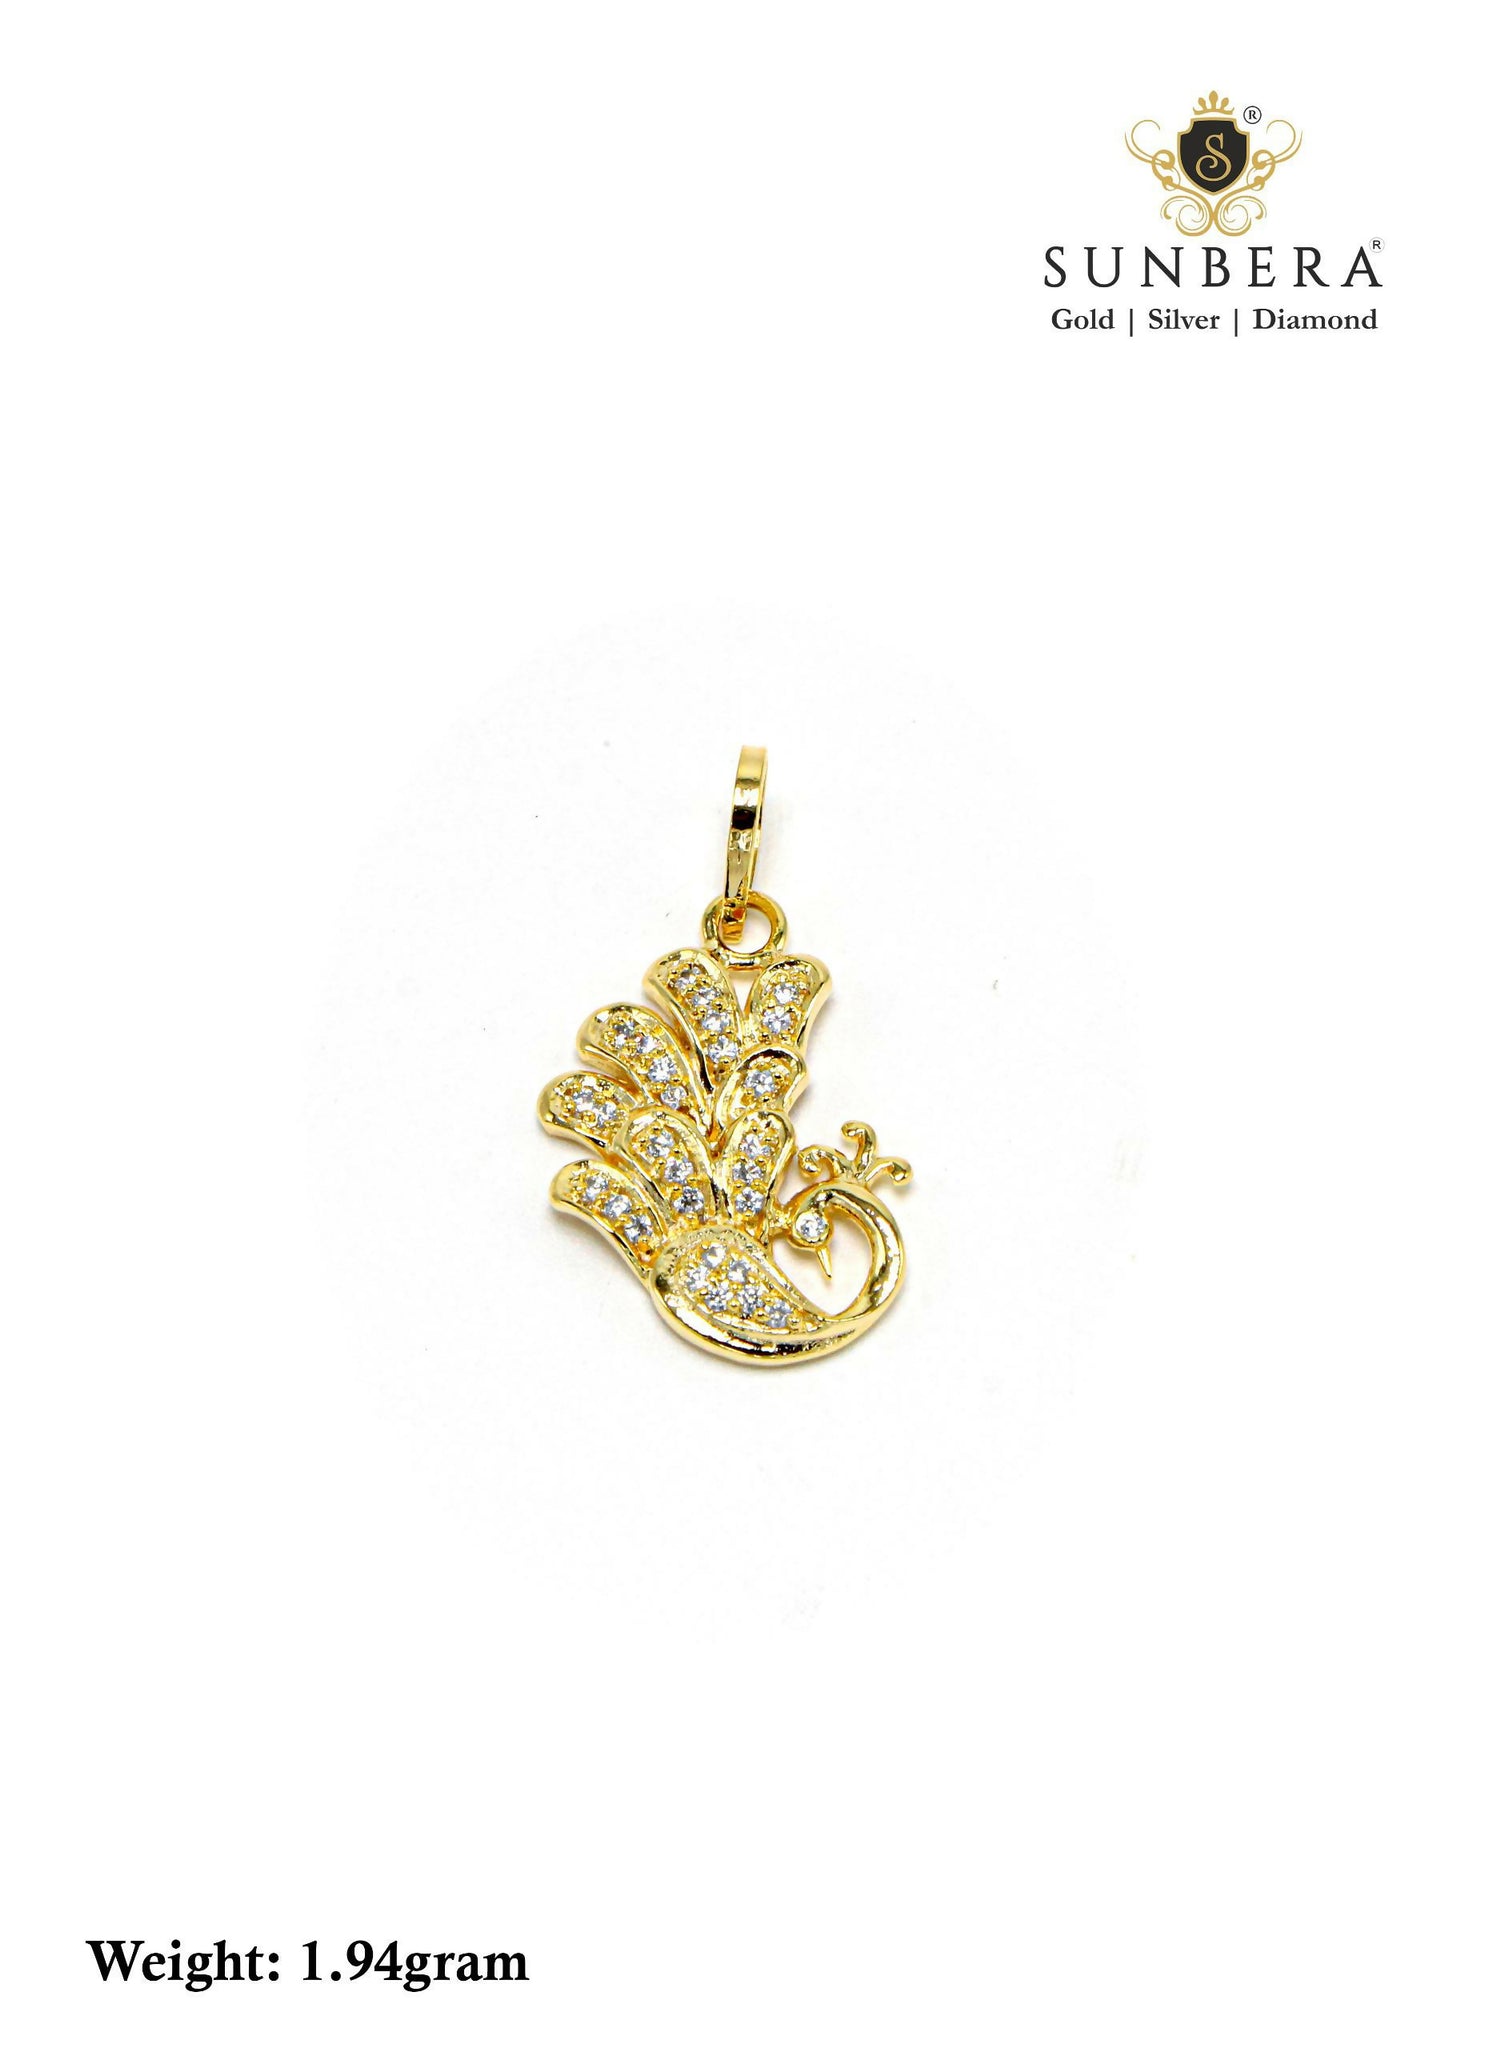 925 Silver Gold Plated Pendant